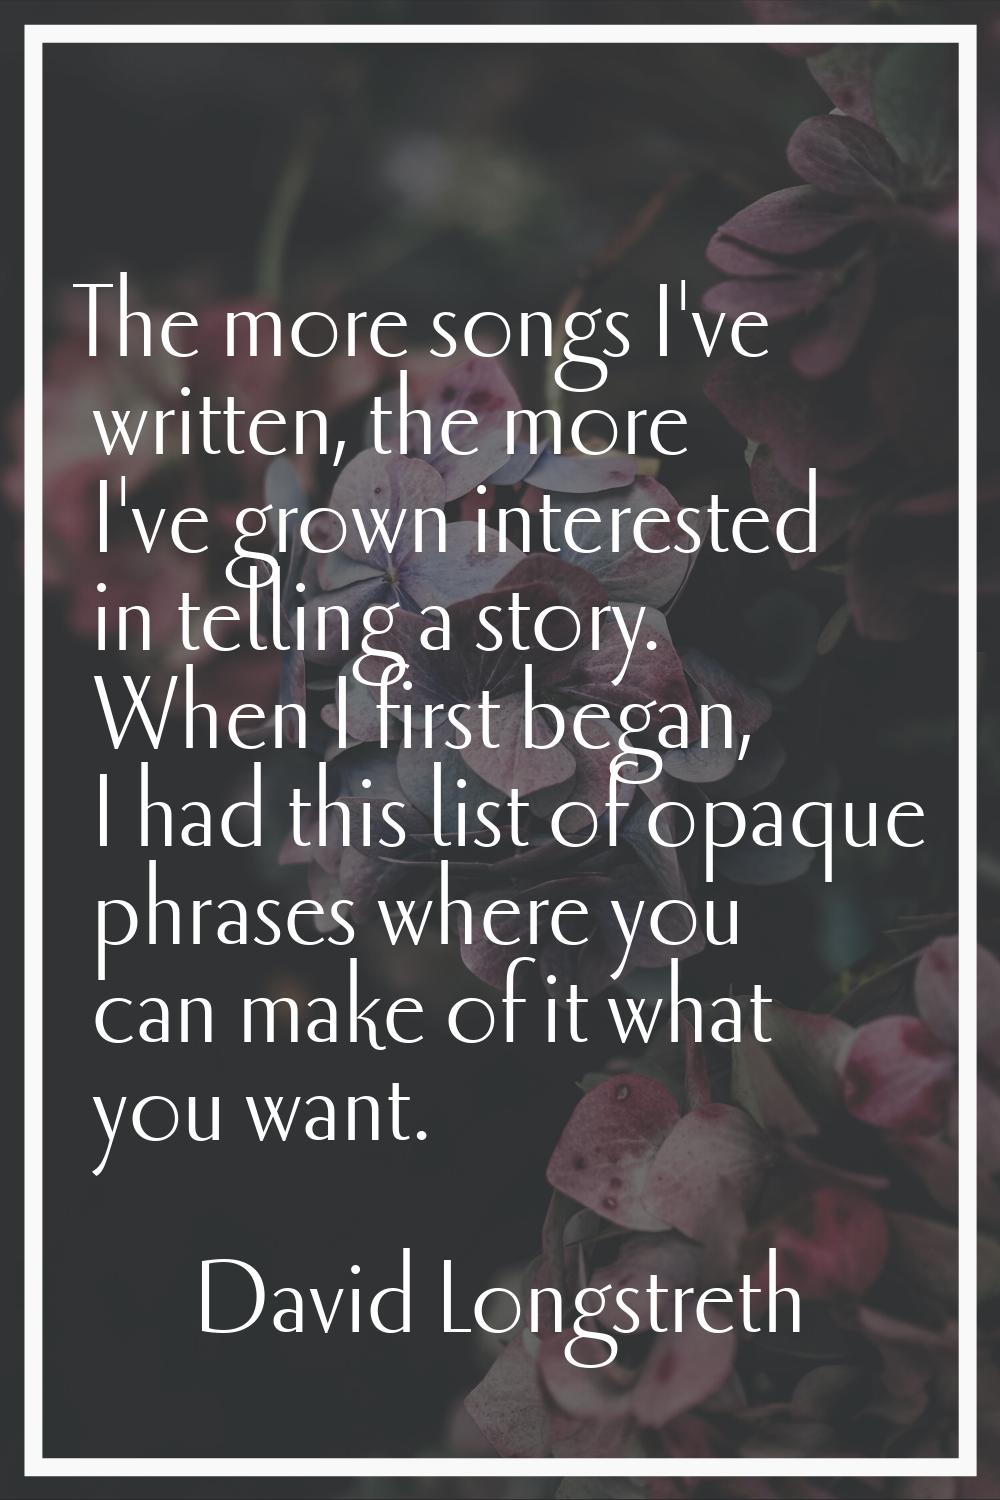 The more songs I've written, the more I've grown interested in telling a story. When I first began,